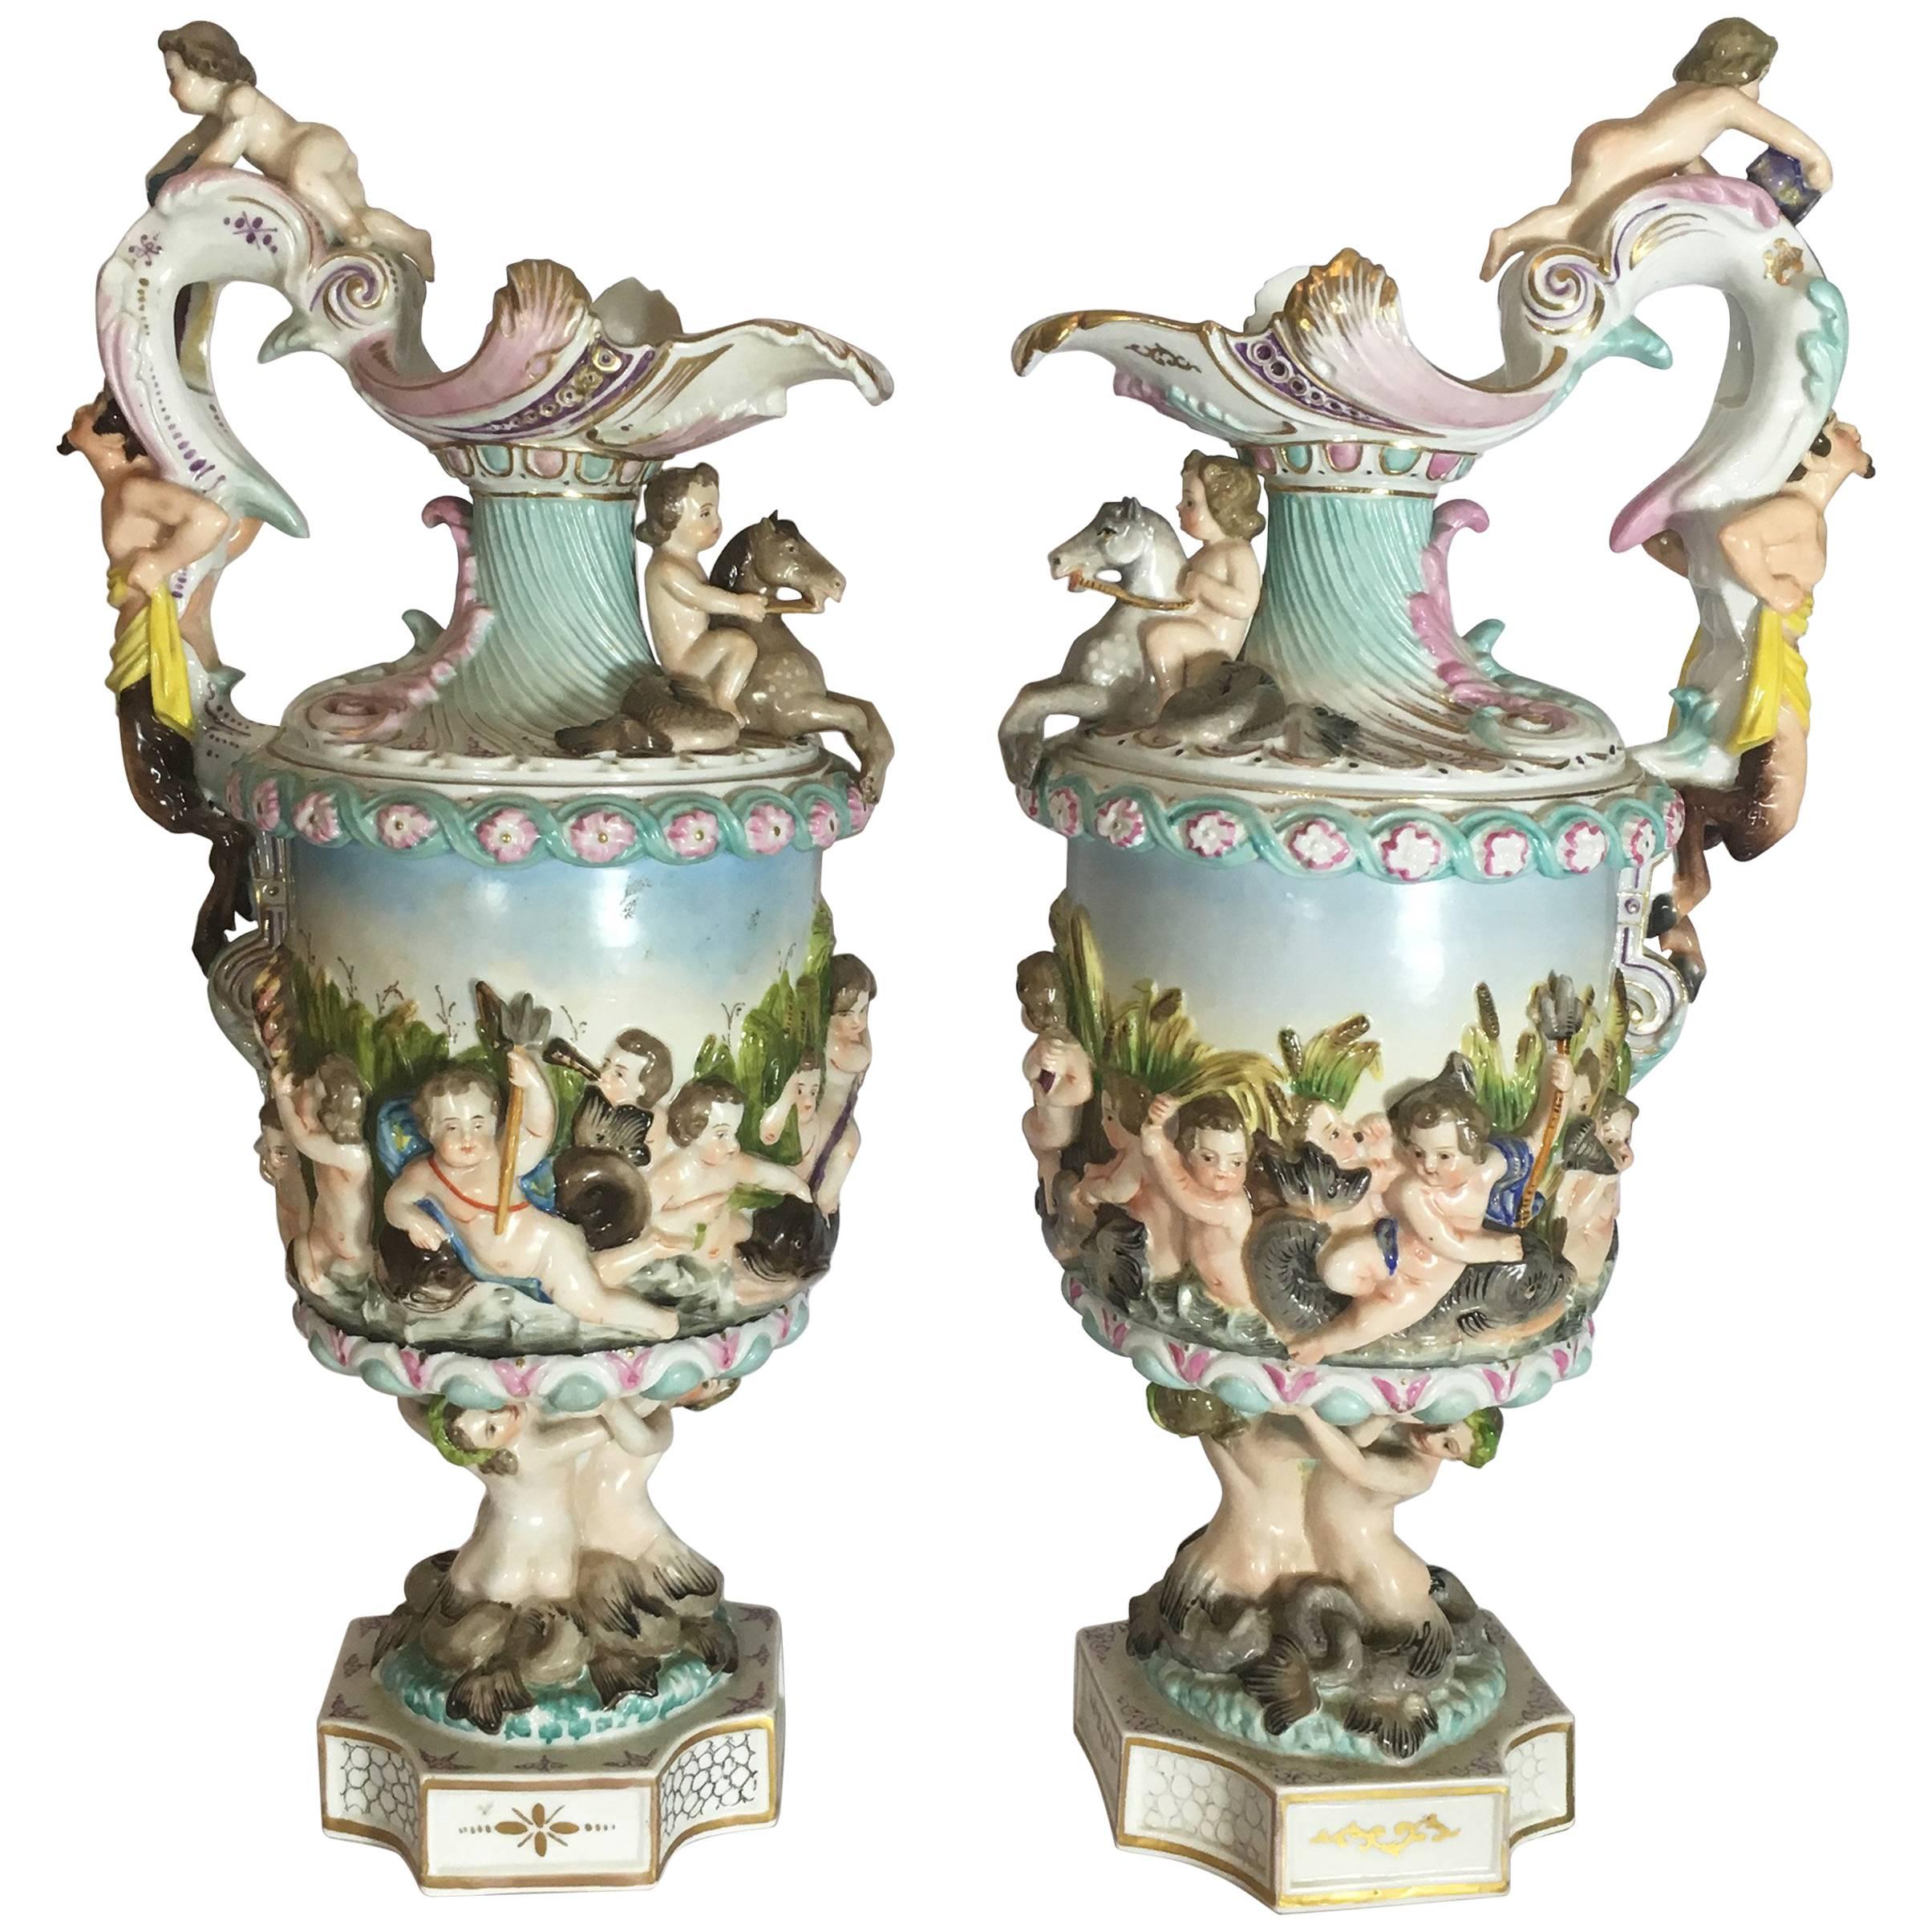 Pair of Late 19th Century Meissen Porcelain Ewers with Maritime Scene